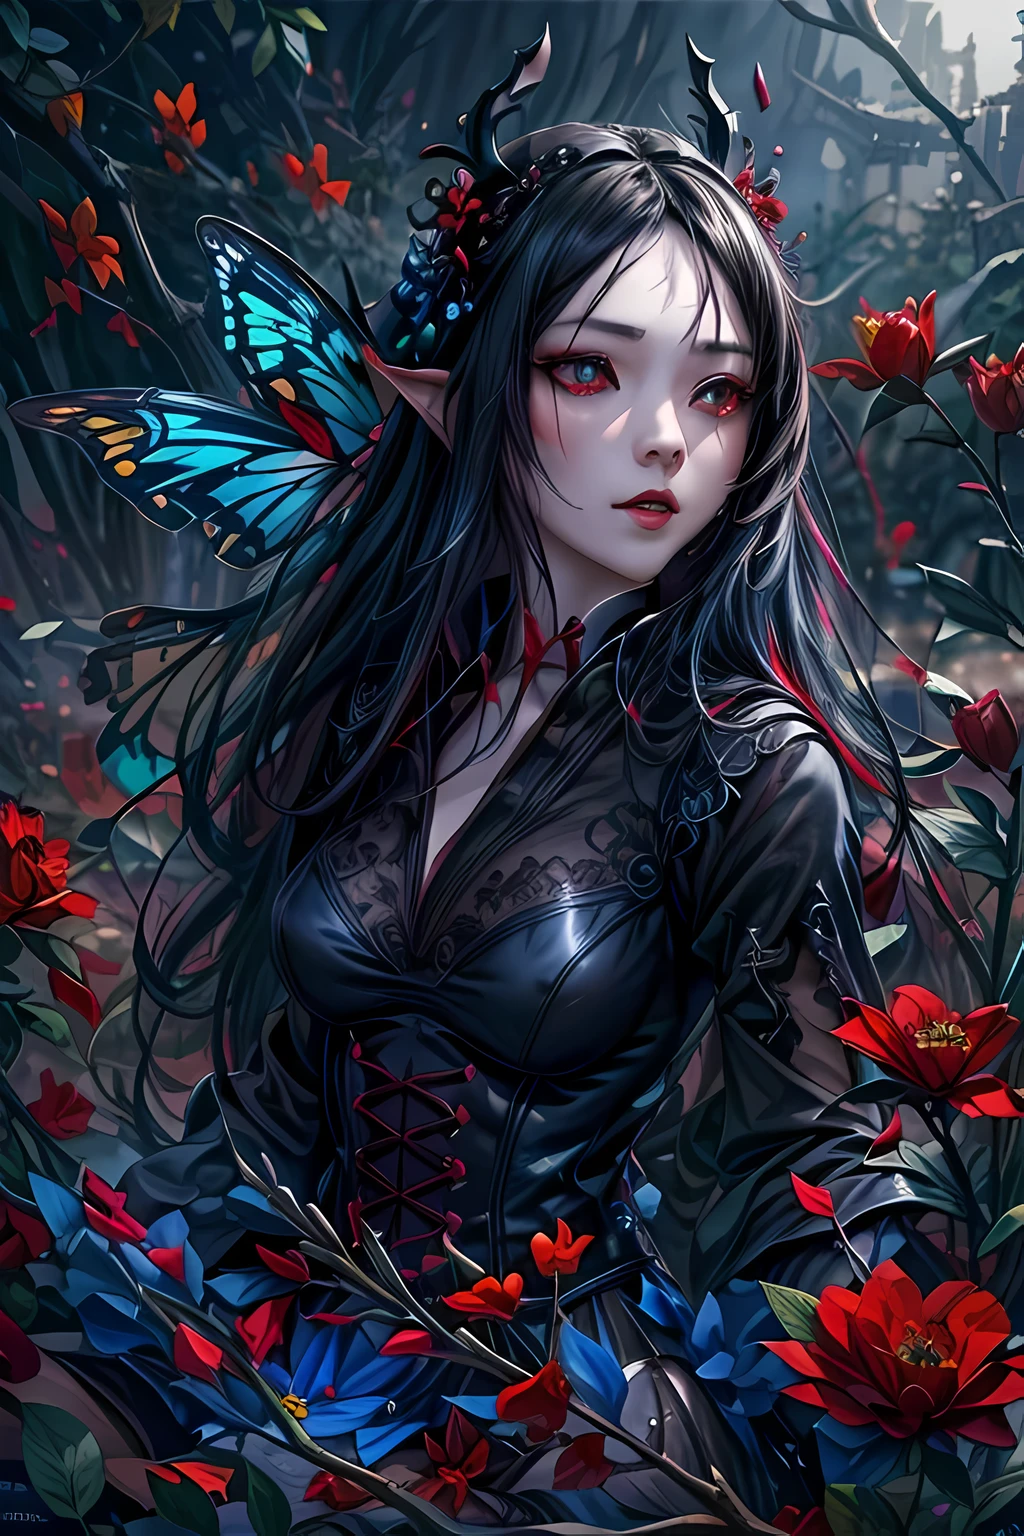 high details, best quality, 16k, RAW, [best detailed], masterpiece, best quality, (extremely detailed), full body, ultra wide shot, photorealistic, dark fantasy art, goth art, RPG art, D&D art, a picture of a dark female fairy resting in a flower meadow, extremely beautiful fairy, ultra feminine (intense details, Masterpiece, best quality), best detailed face (intense details, Masterpiece, best quality), having wide butterfly wings, spread butterfly wings (intense details, Masterpiece, best quality), dark colors wings (intense details, Masterpiece, best quality), (blue) hair, long hair, shinning hair, flowing hair, shy smile, innocent smile, (red: 1.3) eyes, dark red lips, wearing [red] dress latex corset (intense details, Masterpiece, best quality), dynamic elegant shirt, chocker, wearing high heels, in dark colored flower meadow (intense details, Masterpiece, best quality), (red flowers: 1.2) , (black flowers: 1.2), (white flowers: 1.2), (blue flowers: 1.3) [extreme many flowers] (intense details, Masterpiece, best quality), dark colorful flowers (intense details, Masterpiece, best quality), flower meadow in a dark goth field background, dim light, cinematic light, High Detail, Ultra High Quality, High Resolution, 16K Resolution, Ultra HD Pictures, 3D rendering Ultra Realistic, Clear Details, Realistic Detail, Ultra High Definition, DonMF41ryW1ng5XL